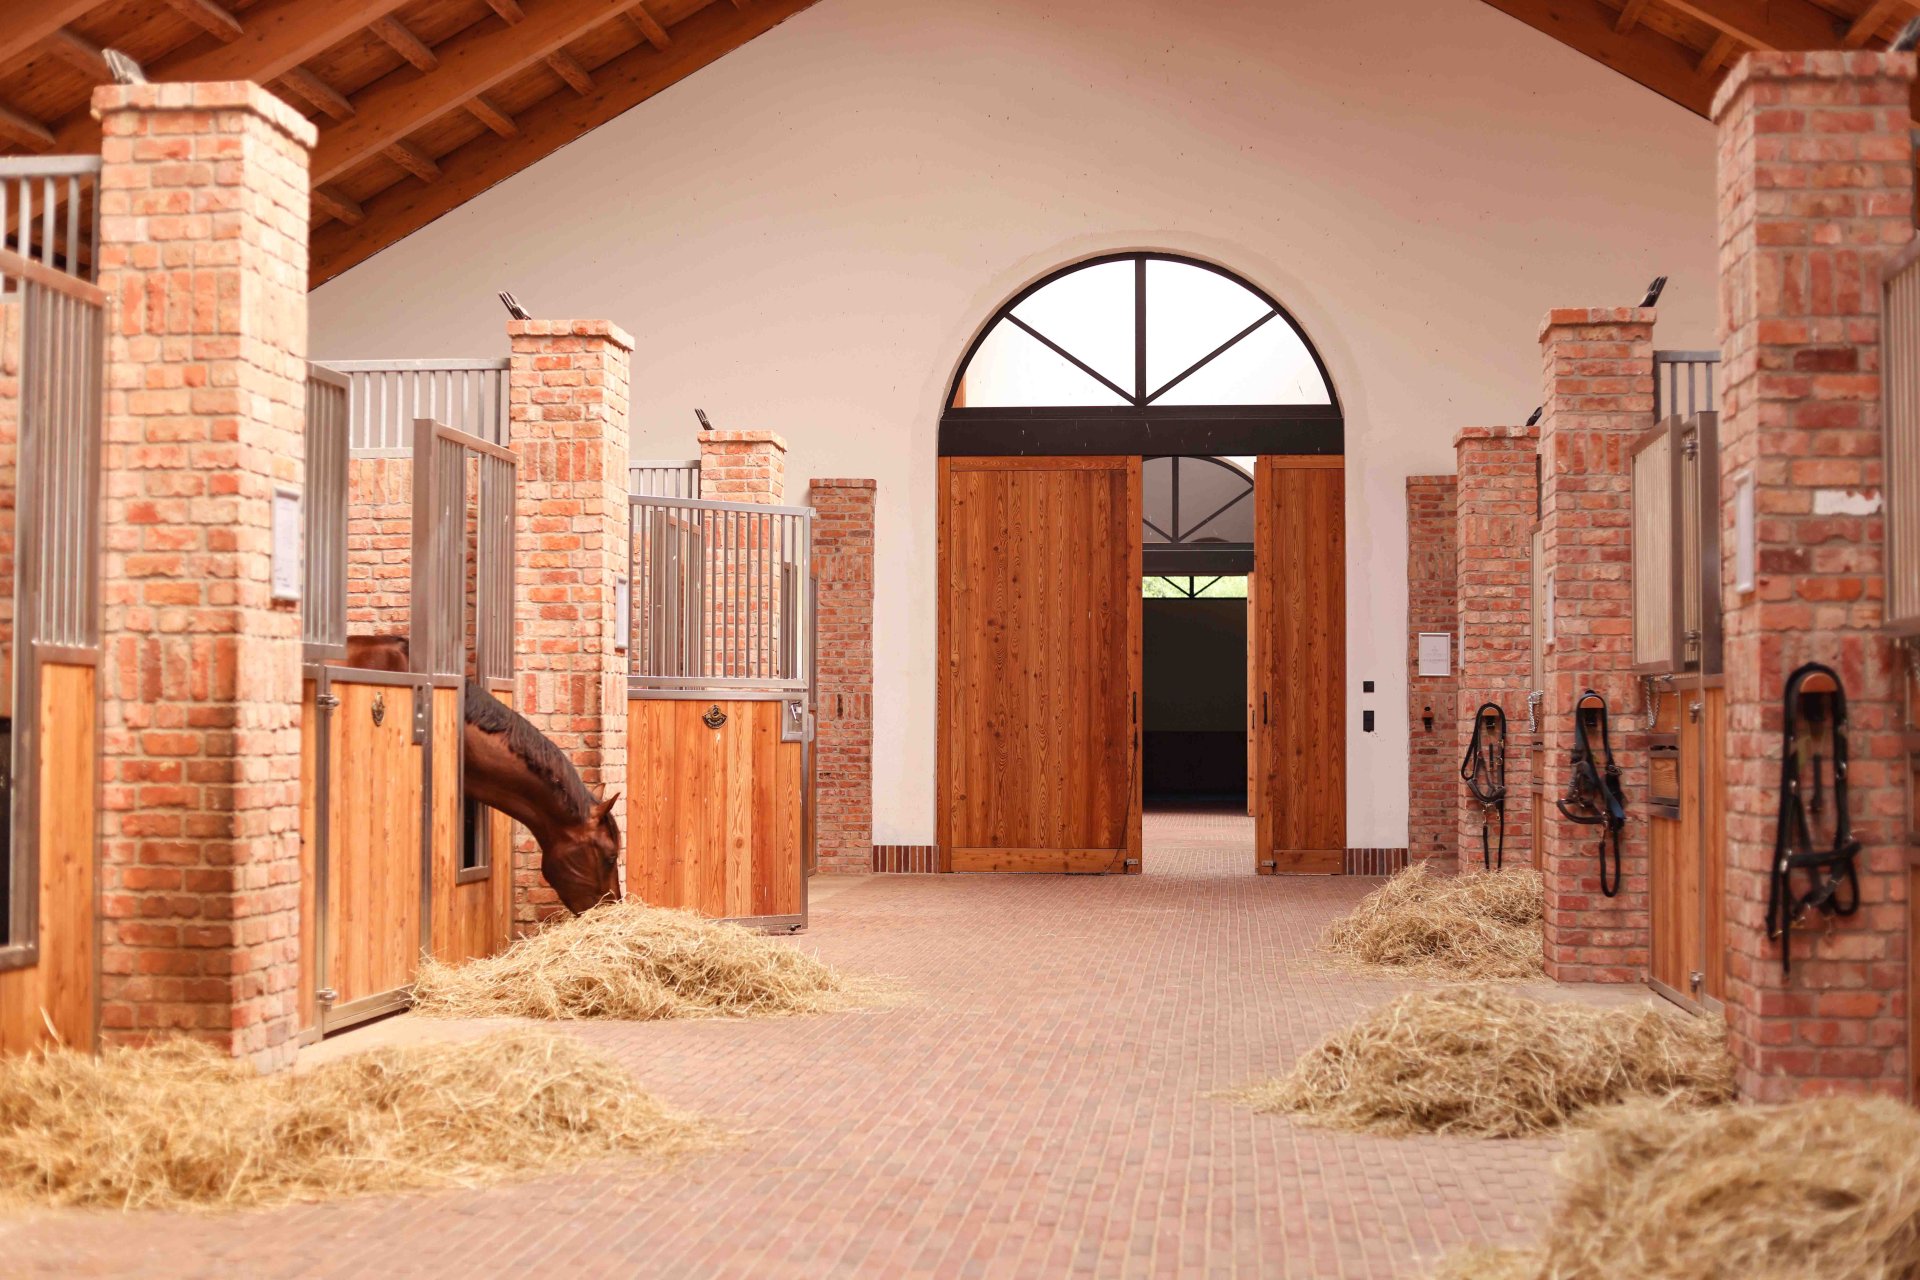 Horses standing in their boxes and eating hay in the stable lane